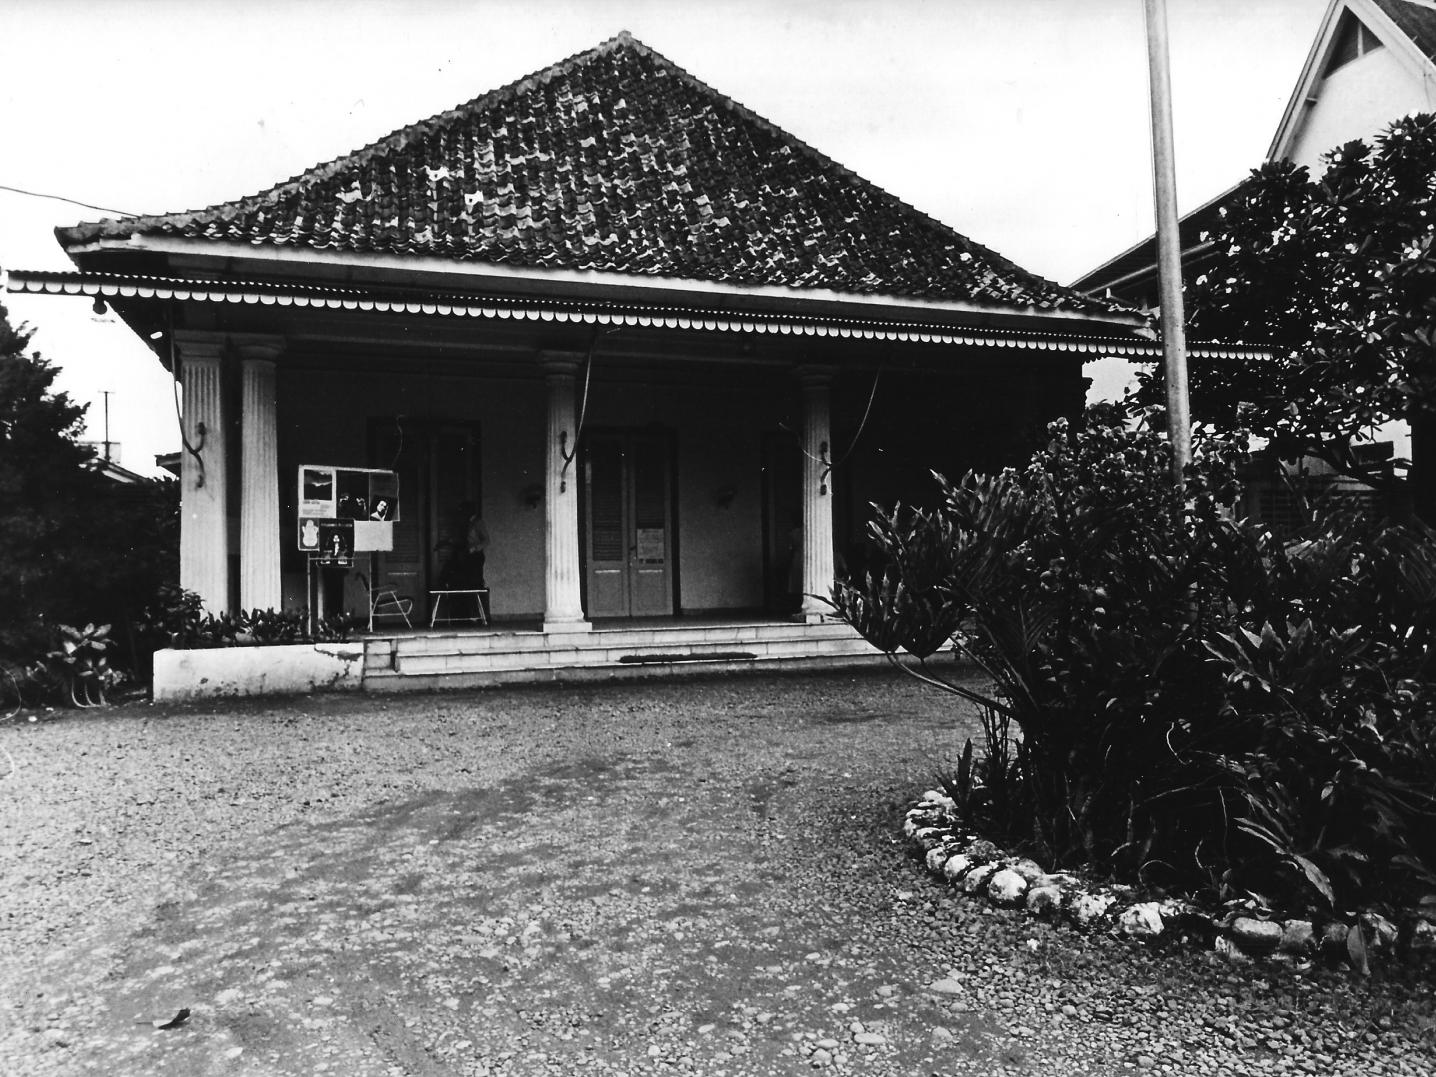 a 1970 photo of the façade of the former Erasmus Huis which was located at Jalan Menteng Raya 25 in Jakarta